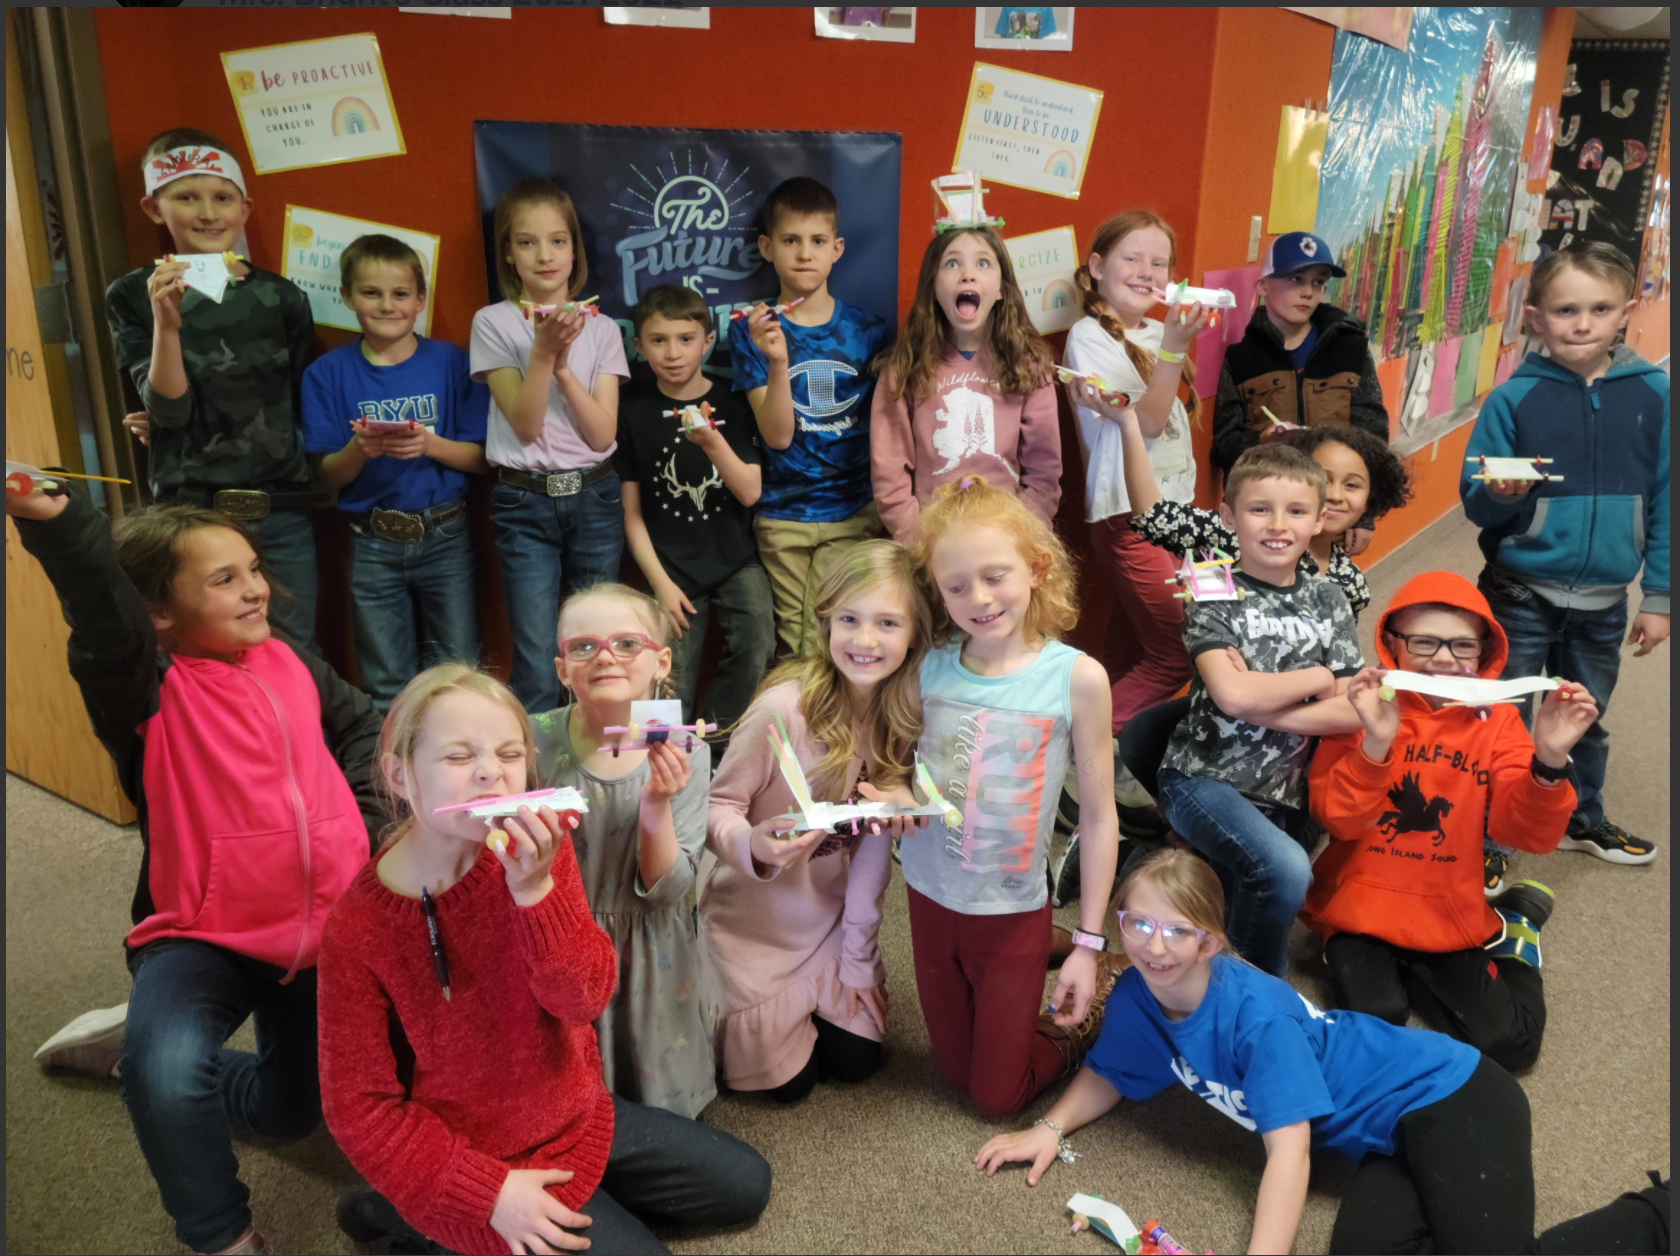 Group photo of students with catapults